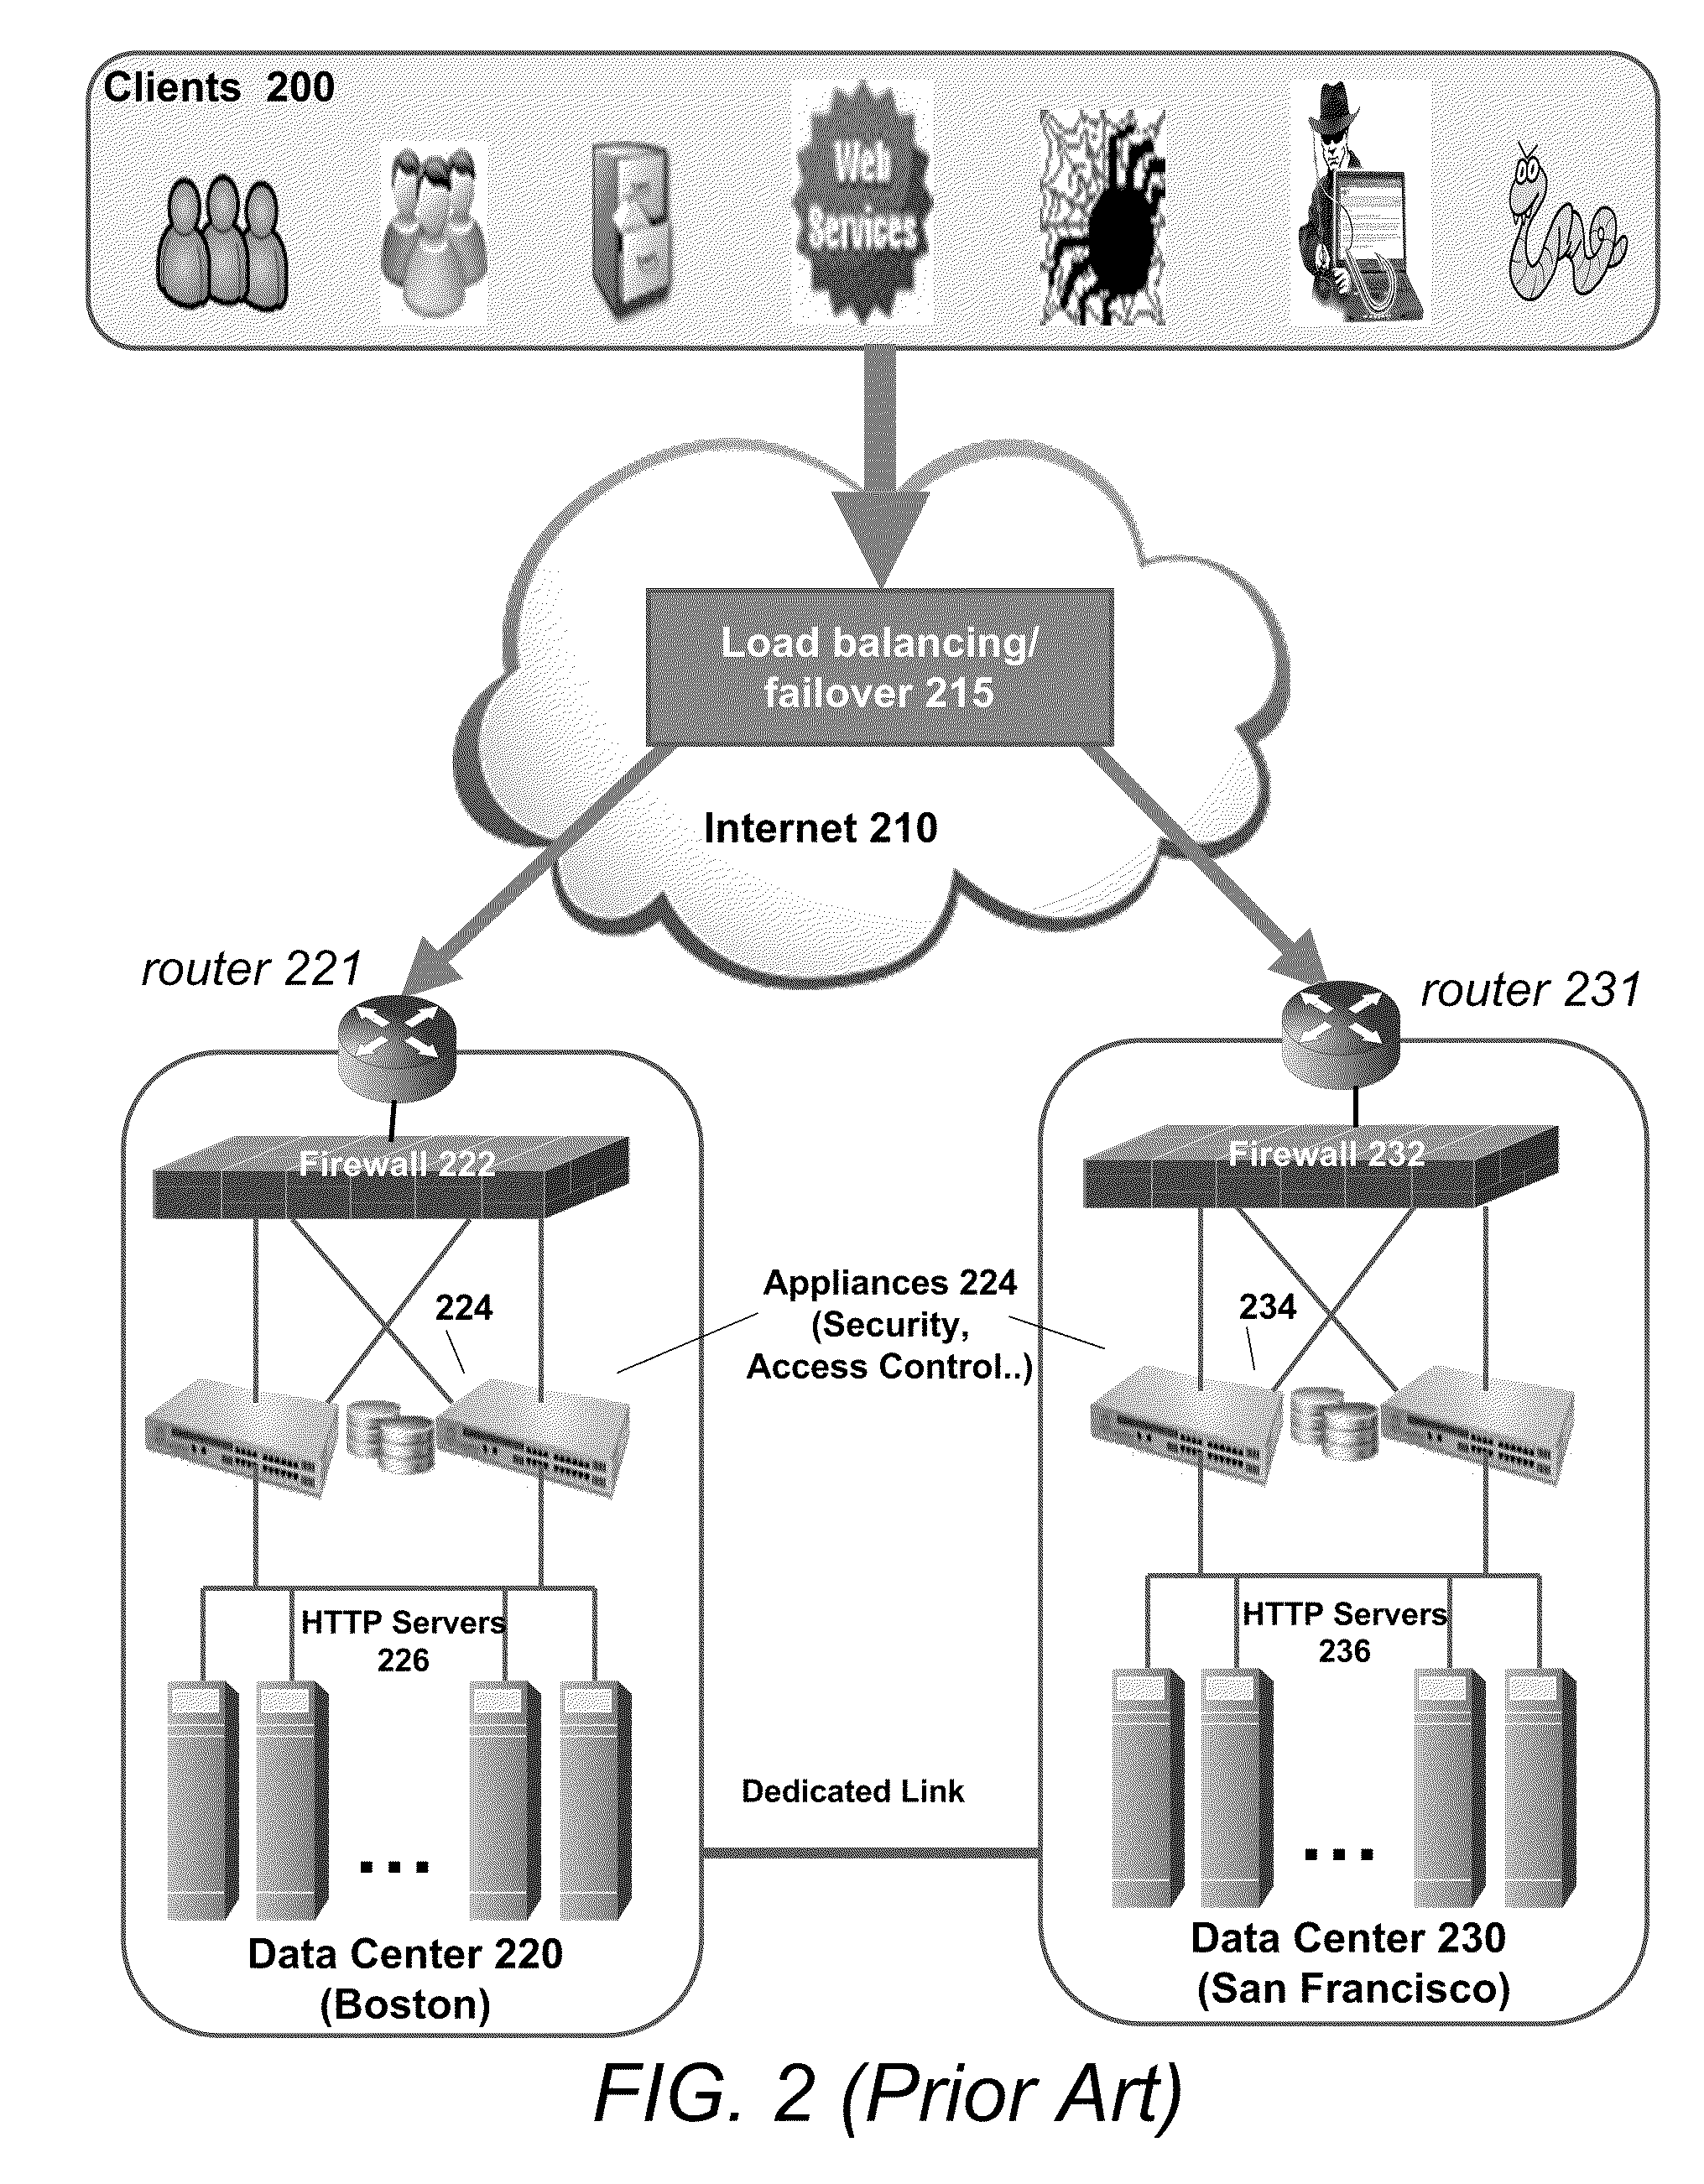 System and method for access management and security protection for network accessible computer services